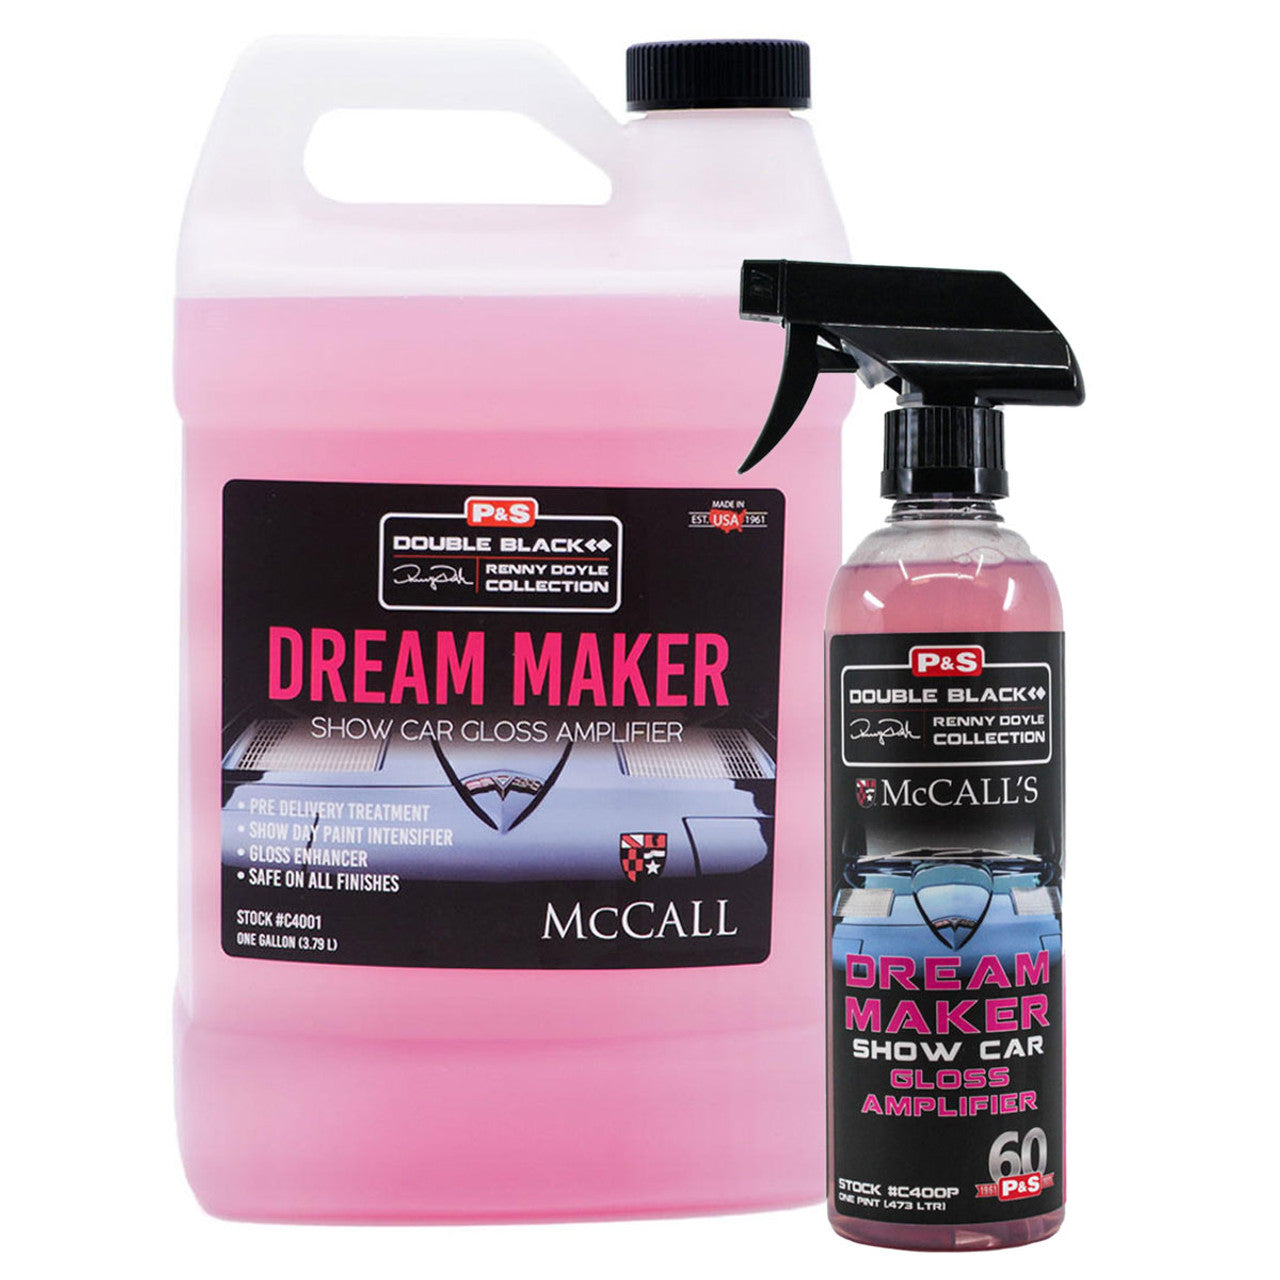 P&S Bead Maker & Dream Maker. How And When To Use Each Product